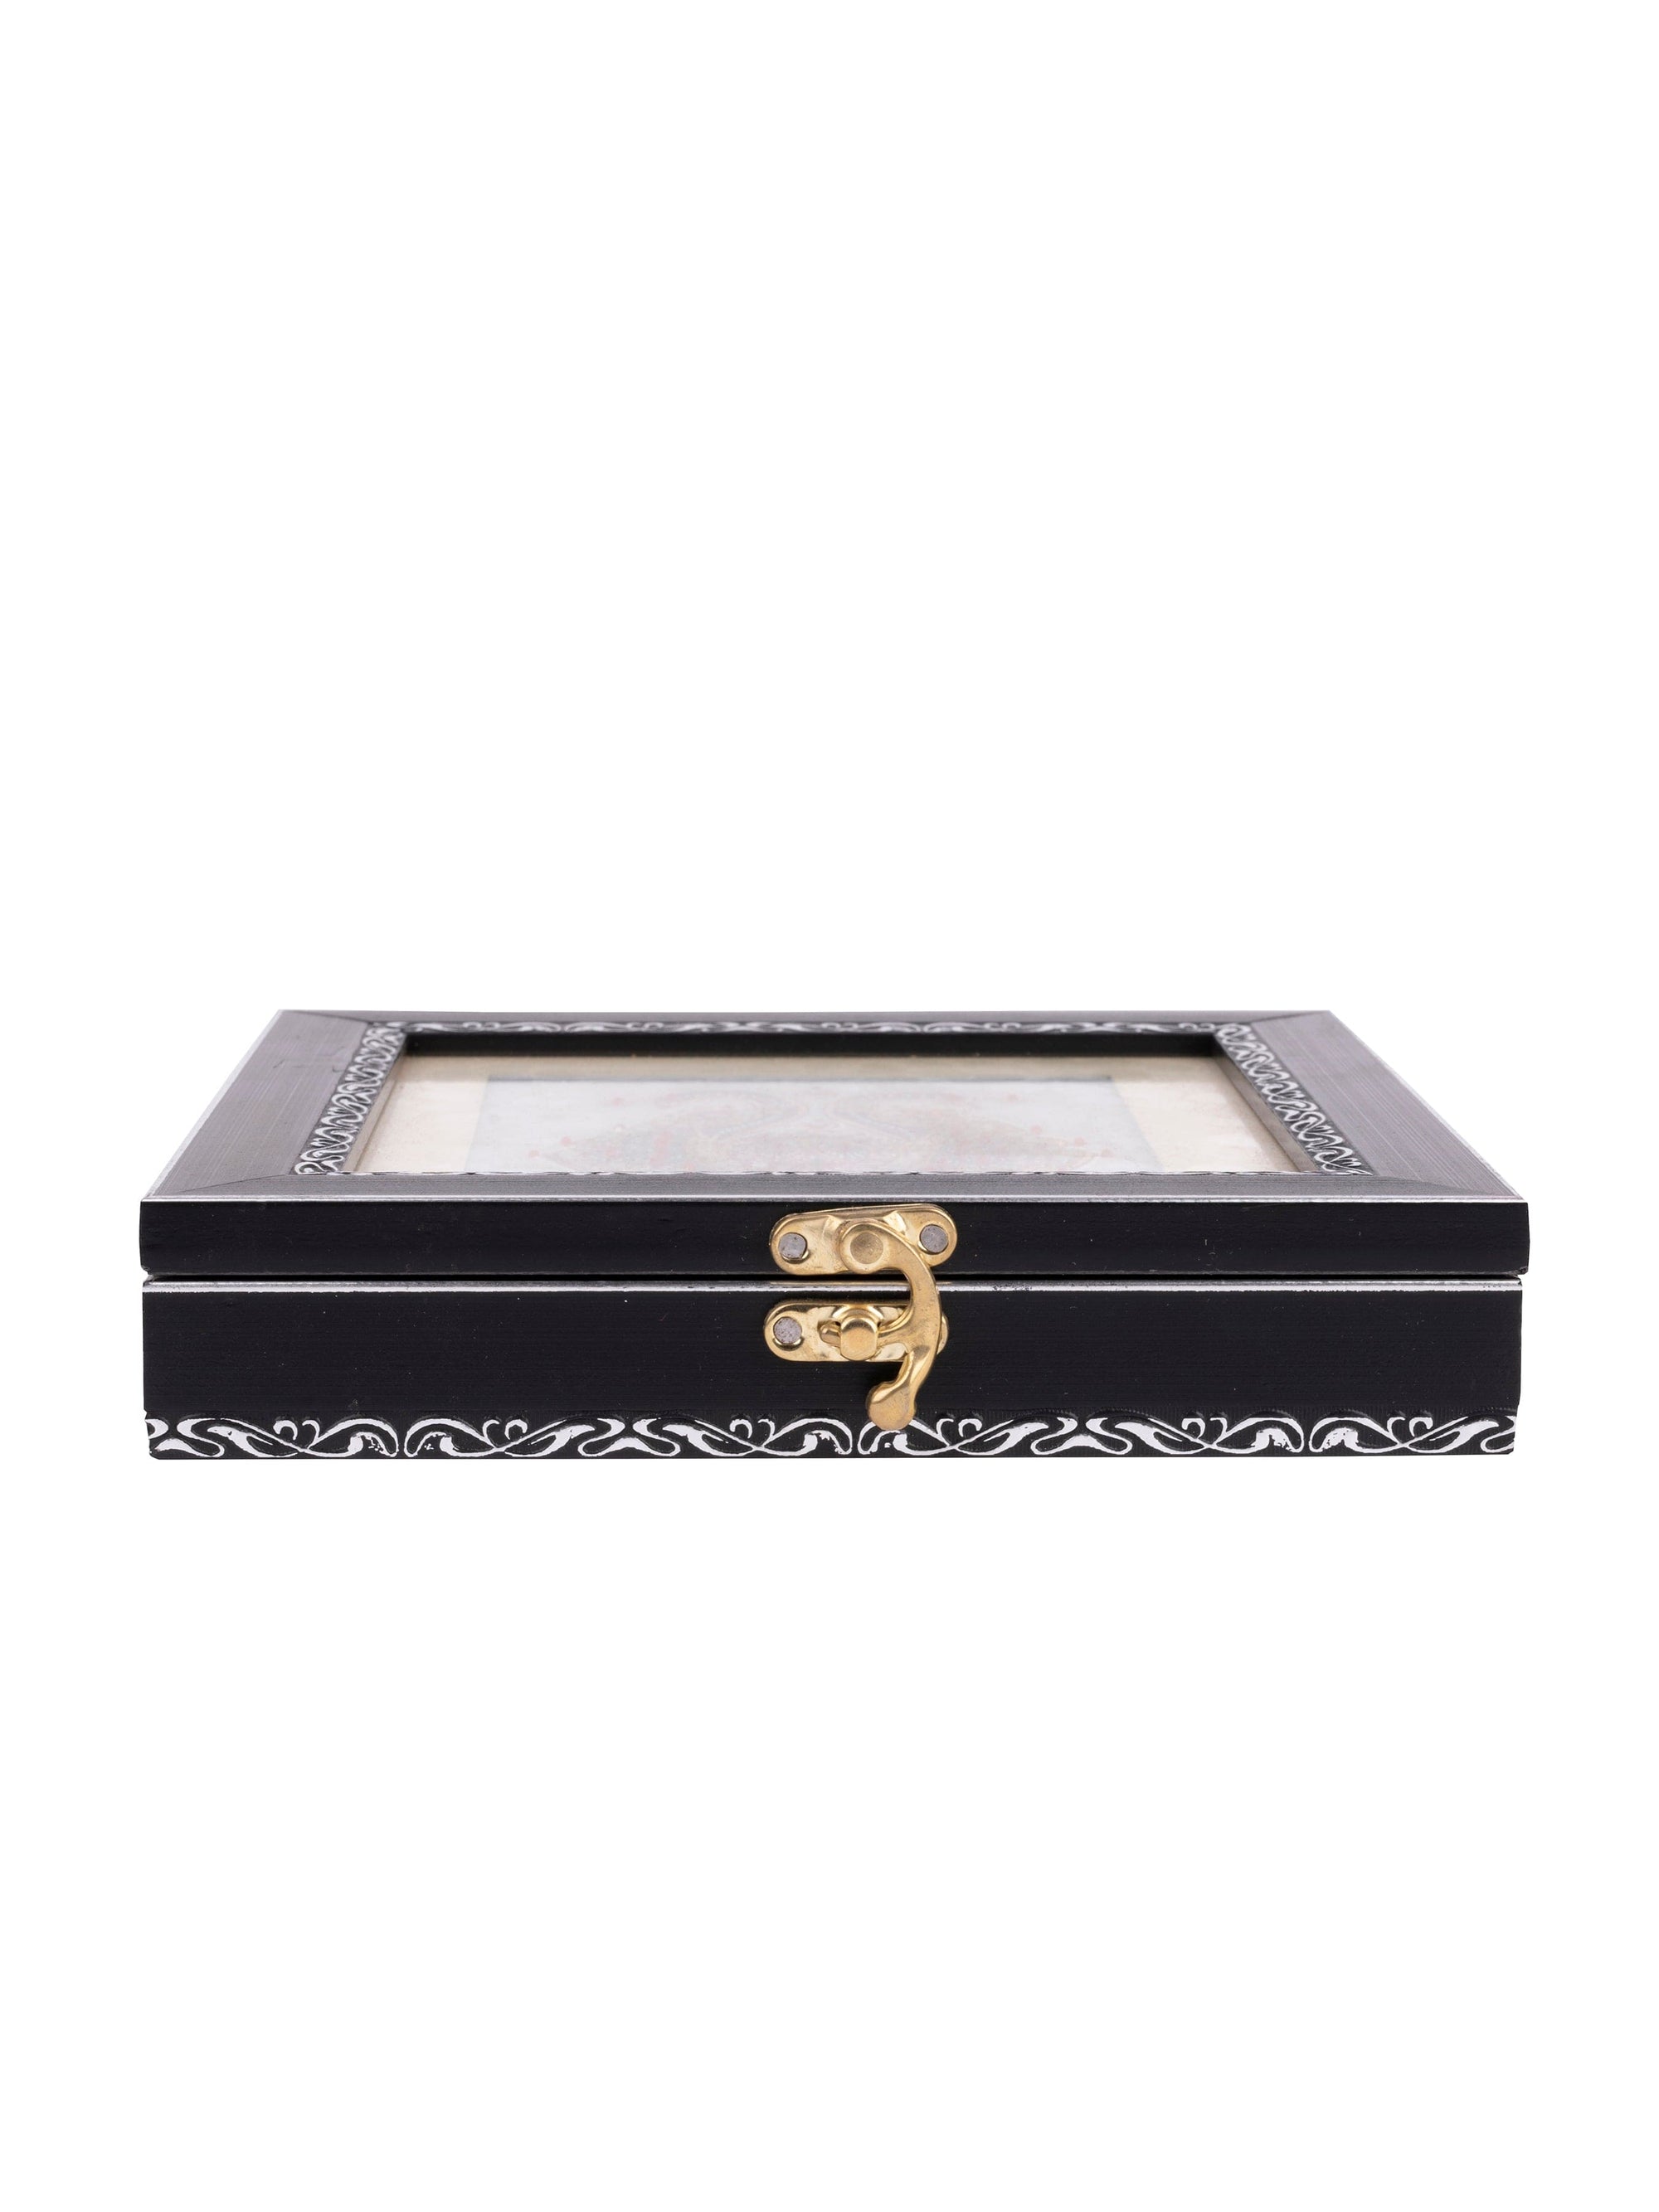 Assorted Design Wooden Gift Box with Marble tile on top  - 9x7 inches - The Heritage Artifacts